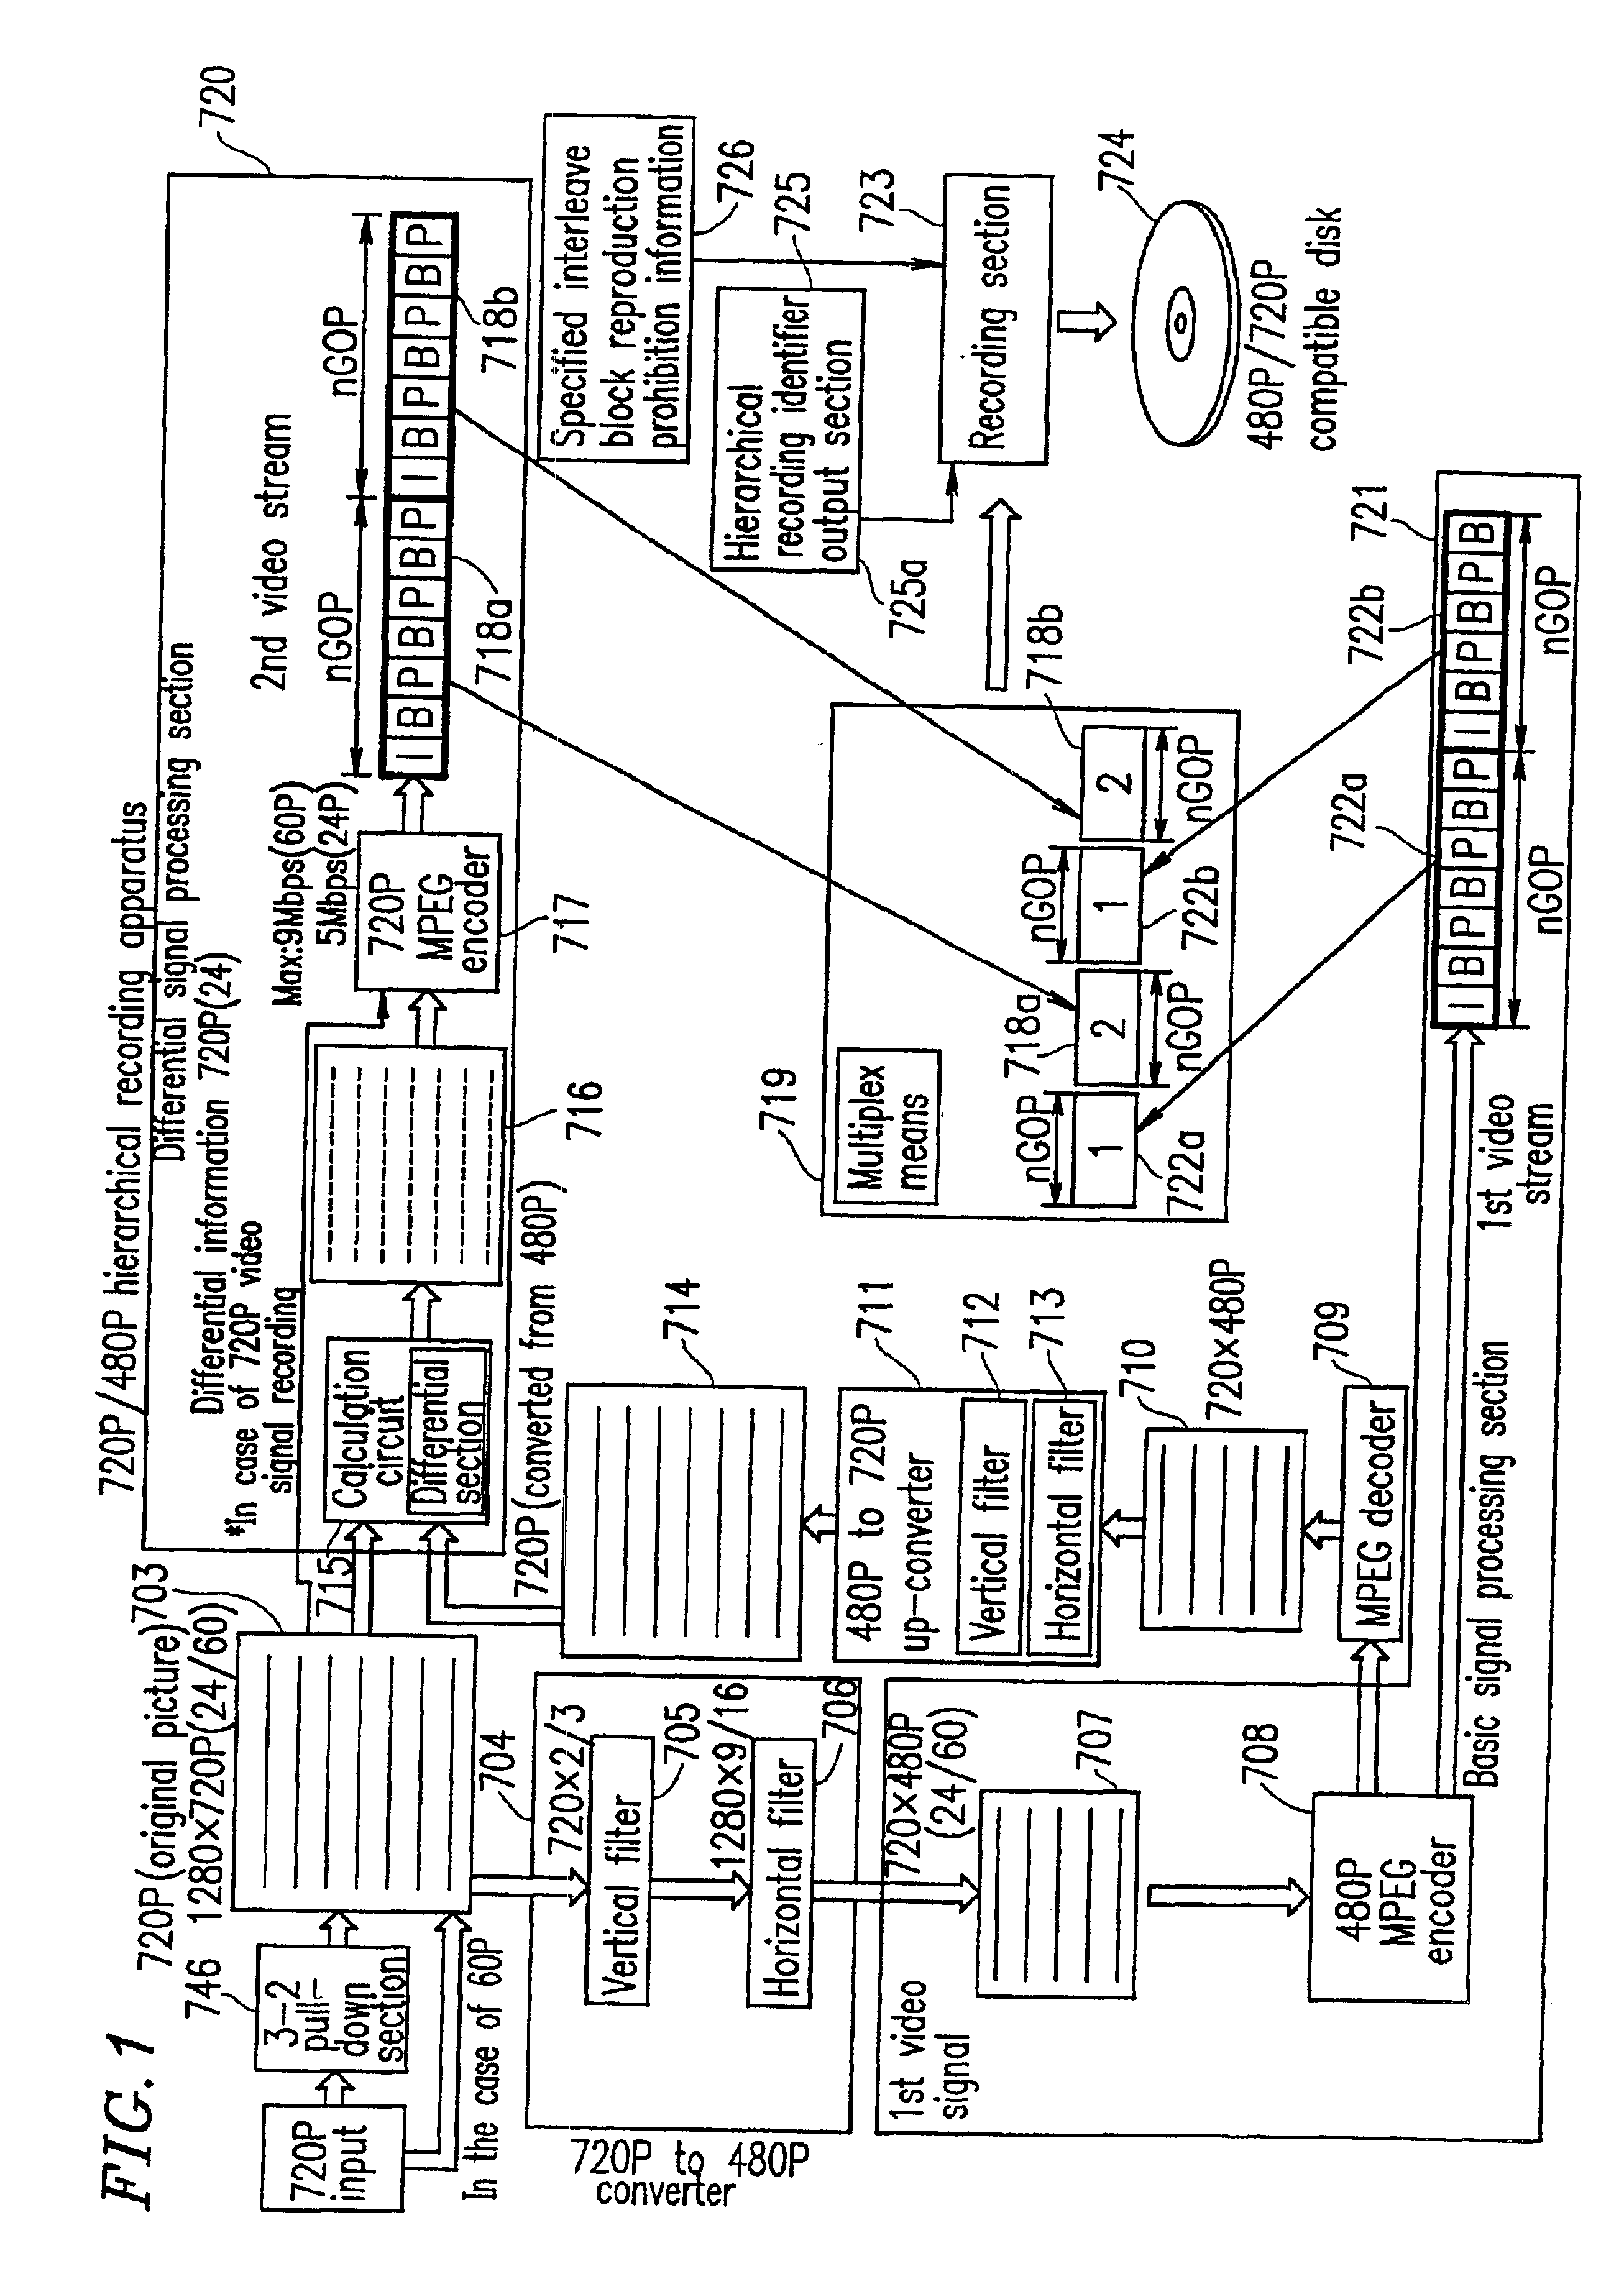 Optical disc for recording high resolution and normal image, optical disc player, optical disc recorder, and playback control information generator